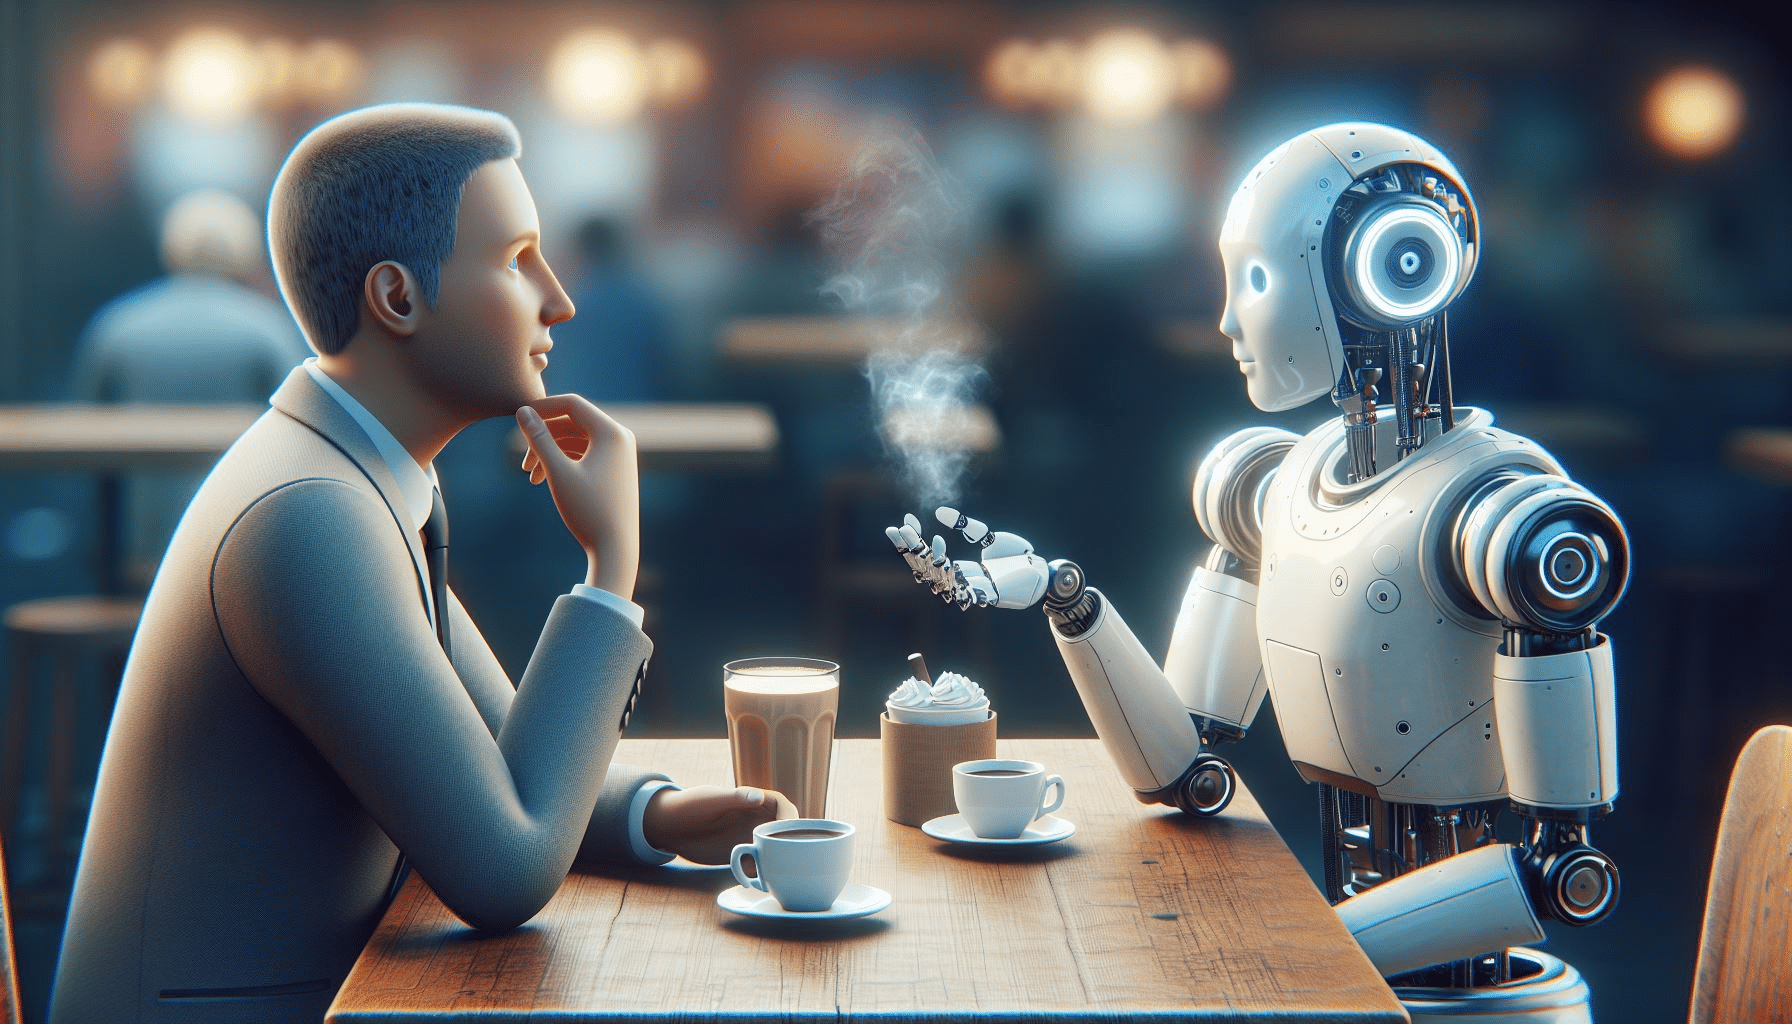 Human and AI Humanizer at a cafe.